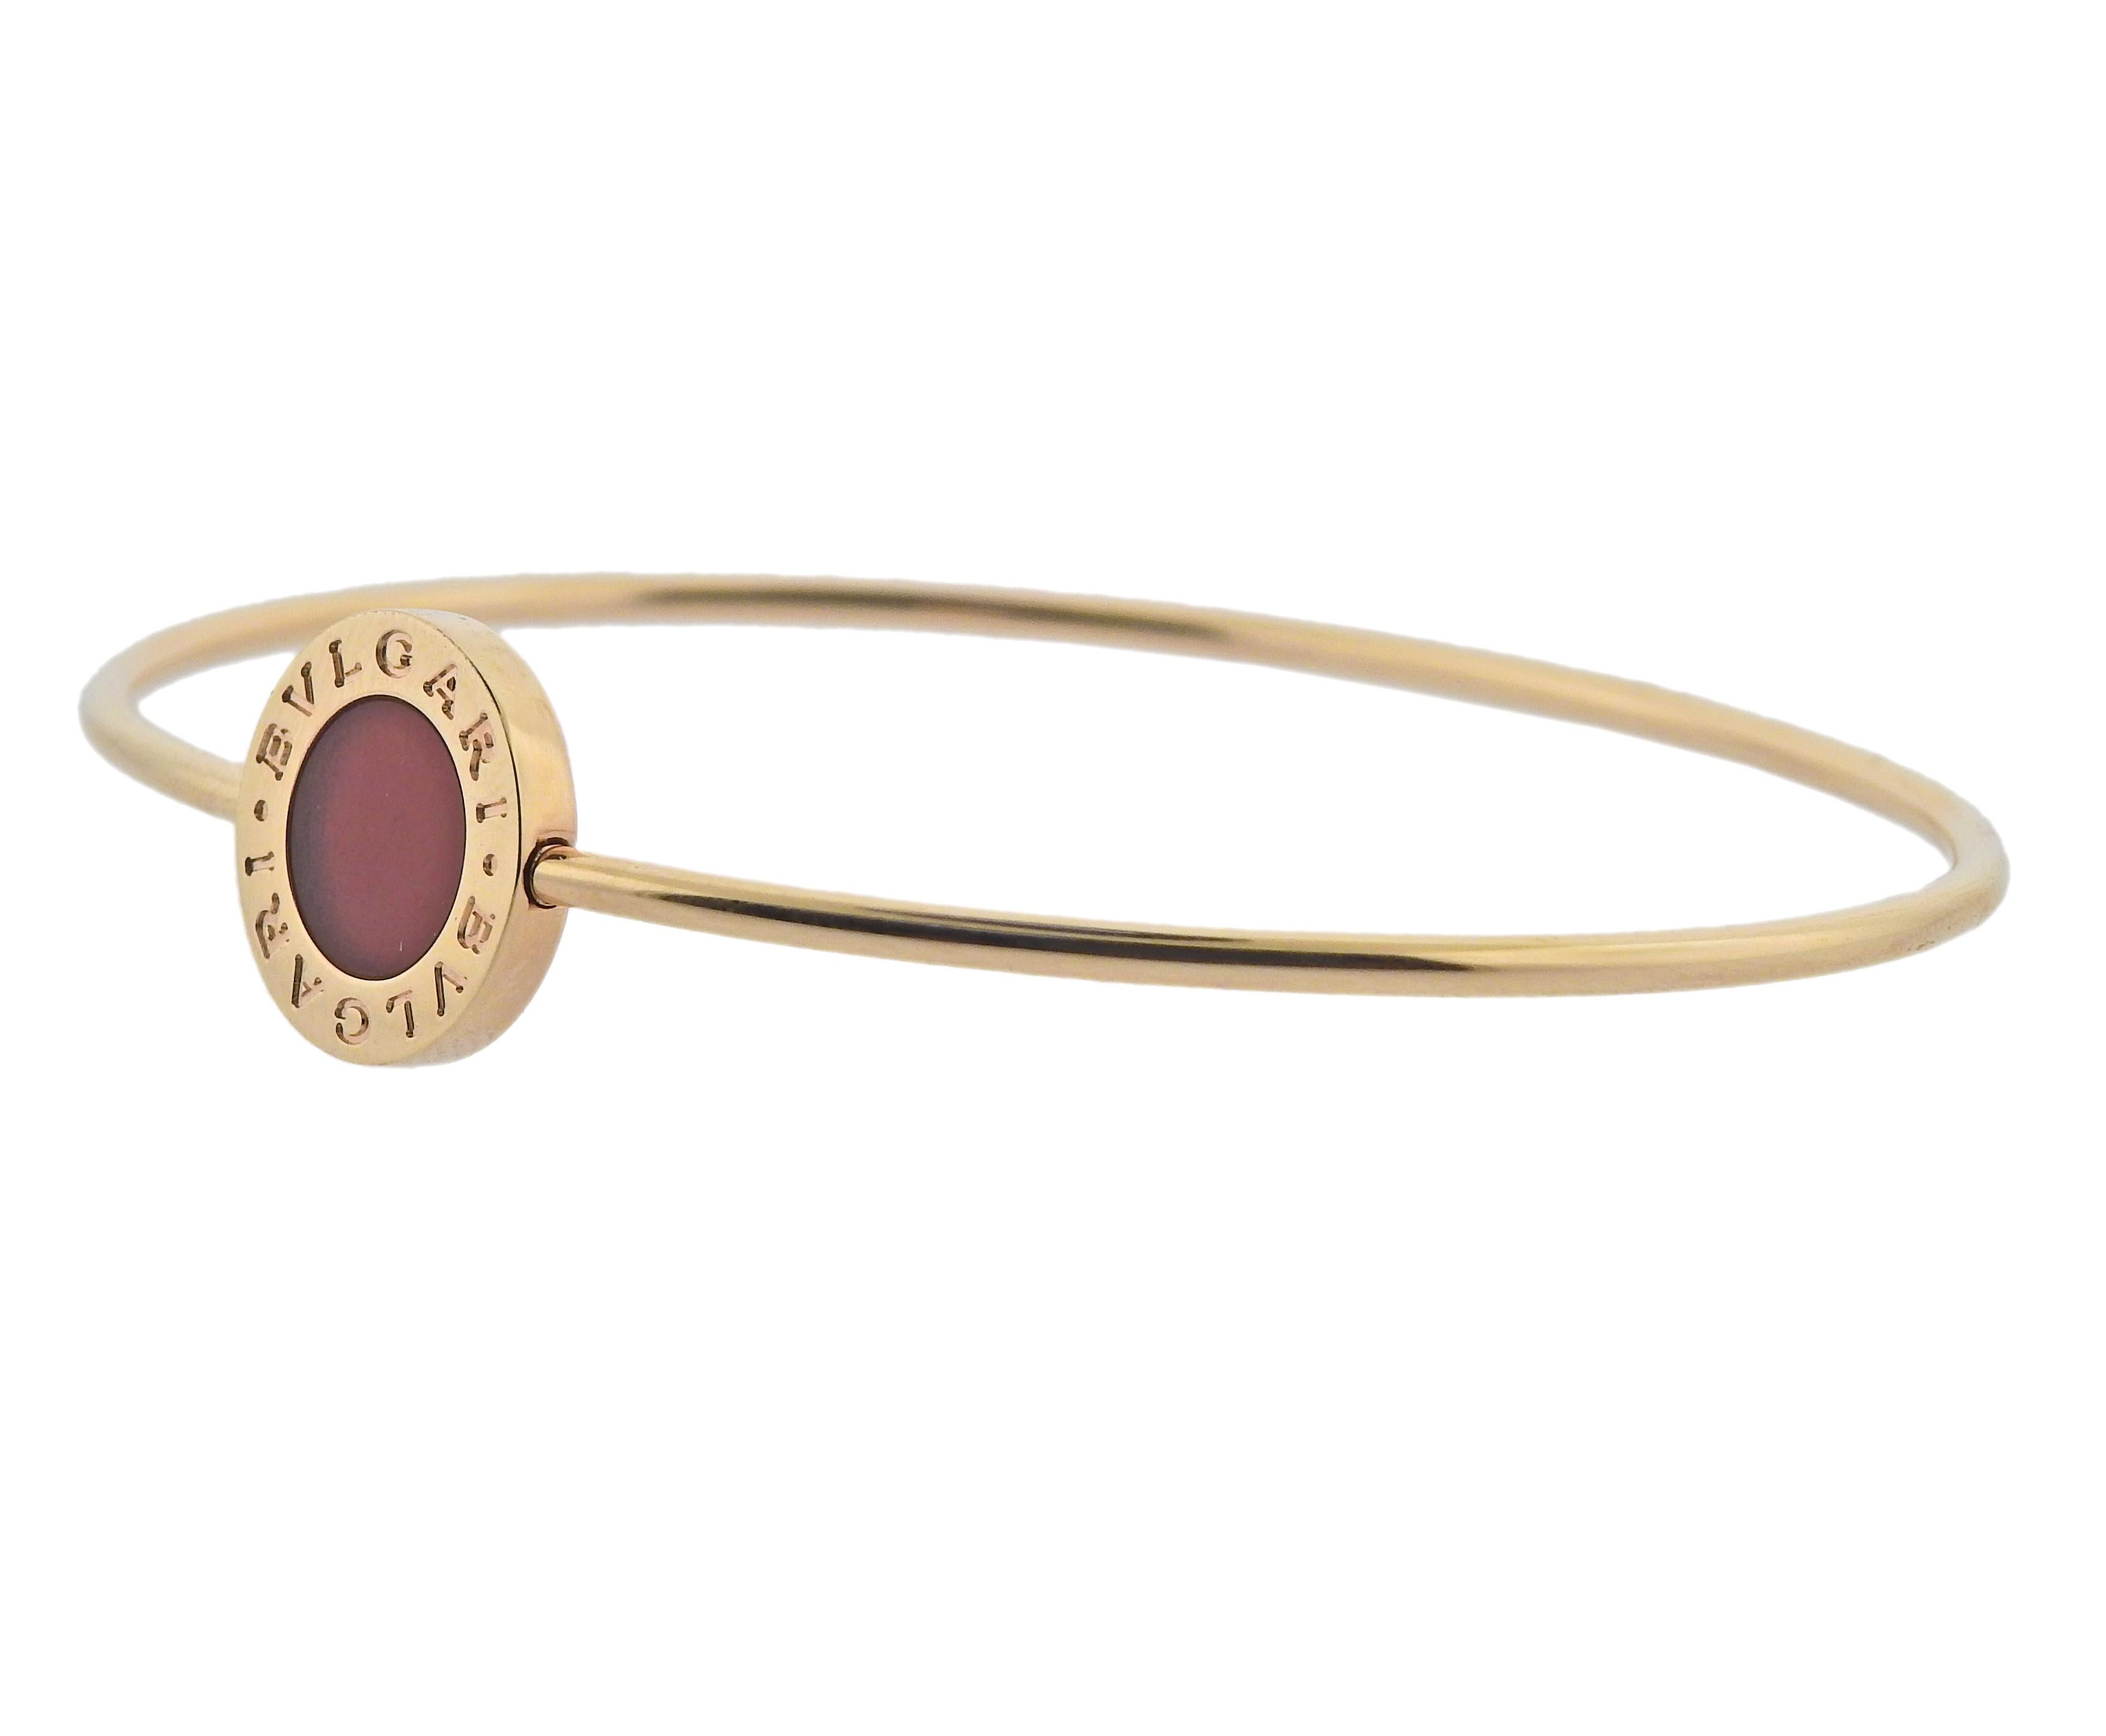 18k rose gold Bvlgari bracelet with carnelian circle.  Retail $2150. Comes with COA and box.  Bracelet will fit approx. 7